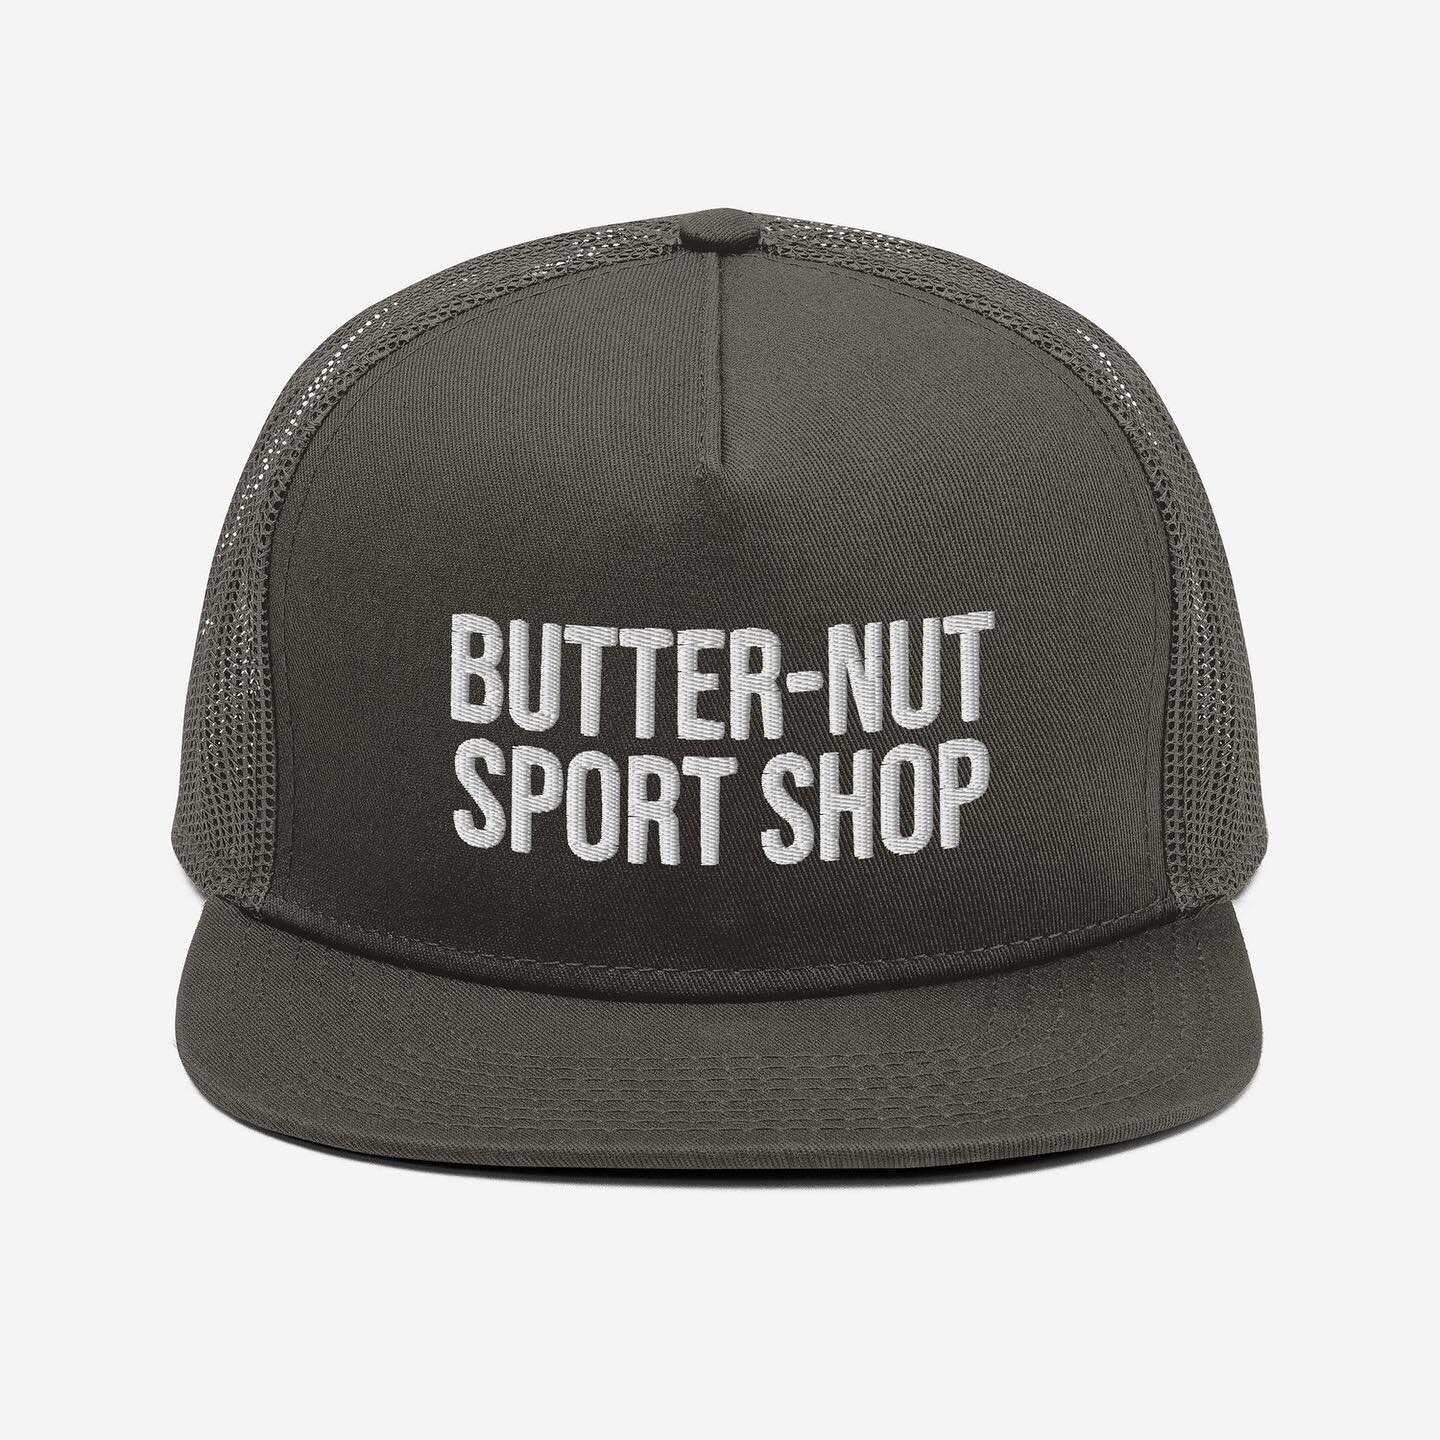 Hats, shirts, and more! Check out the merch shop!

https://www.butternutsportshop.com/wearable-merch